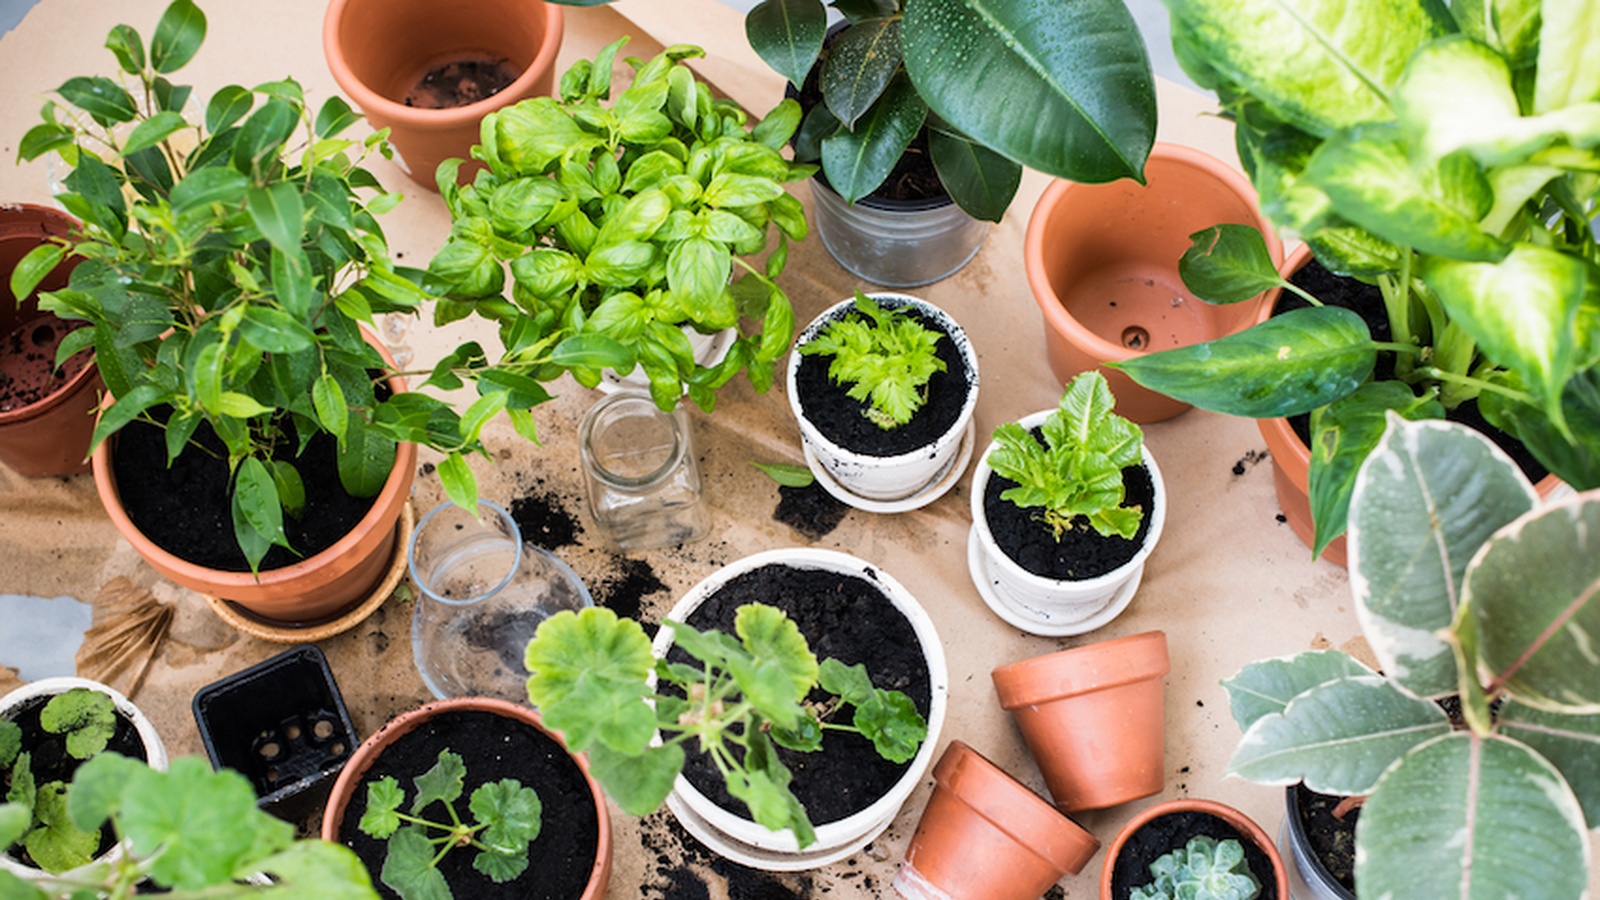 8 Easy Foods To Grow In Almost Any Home